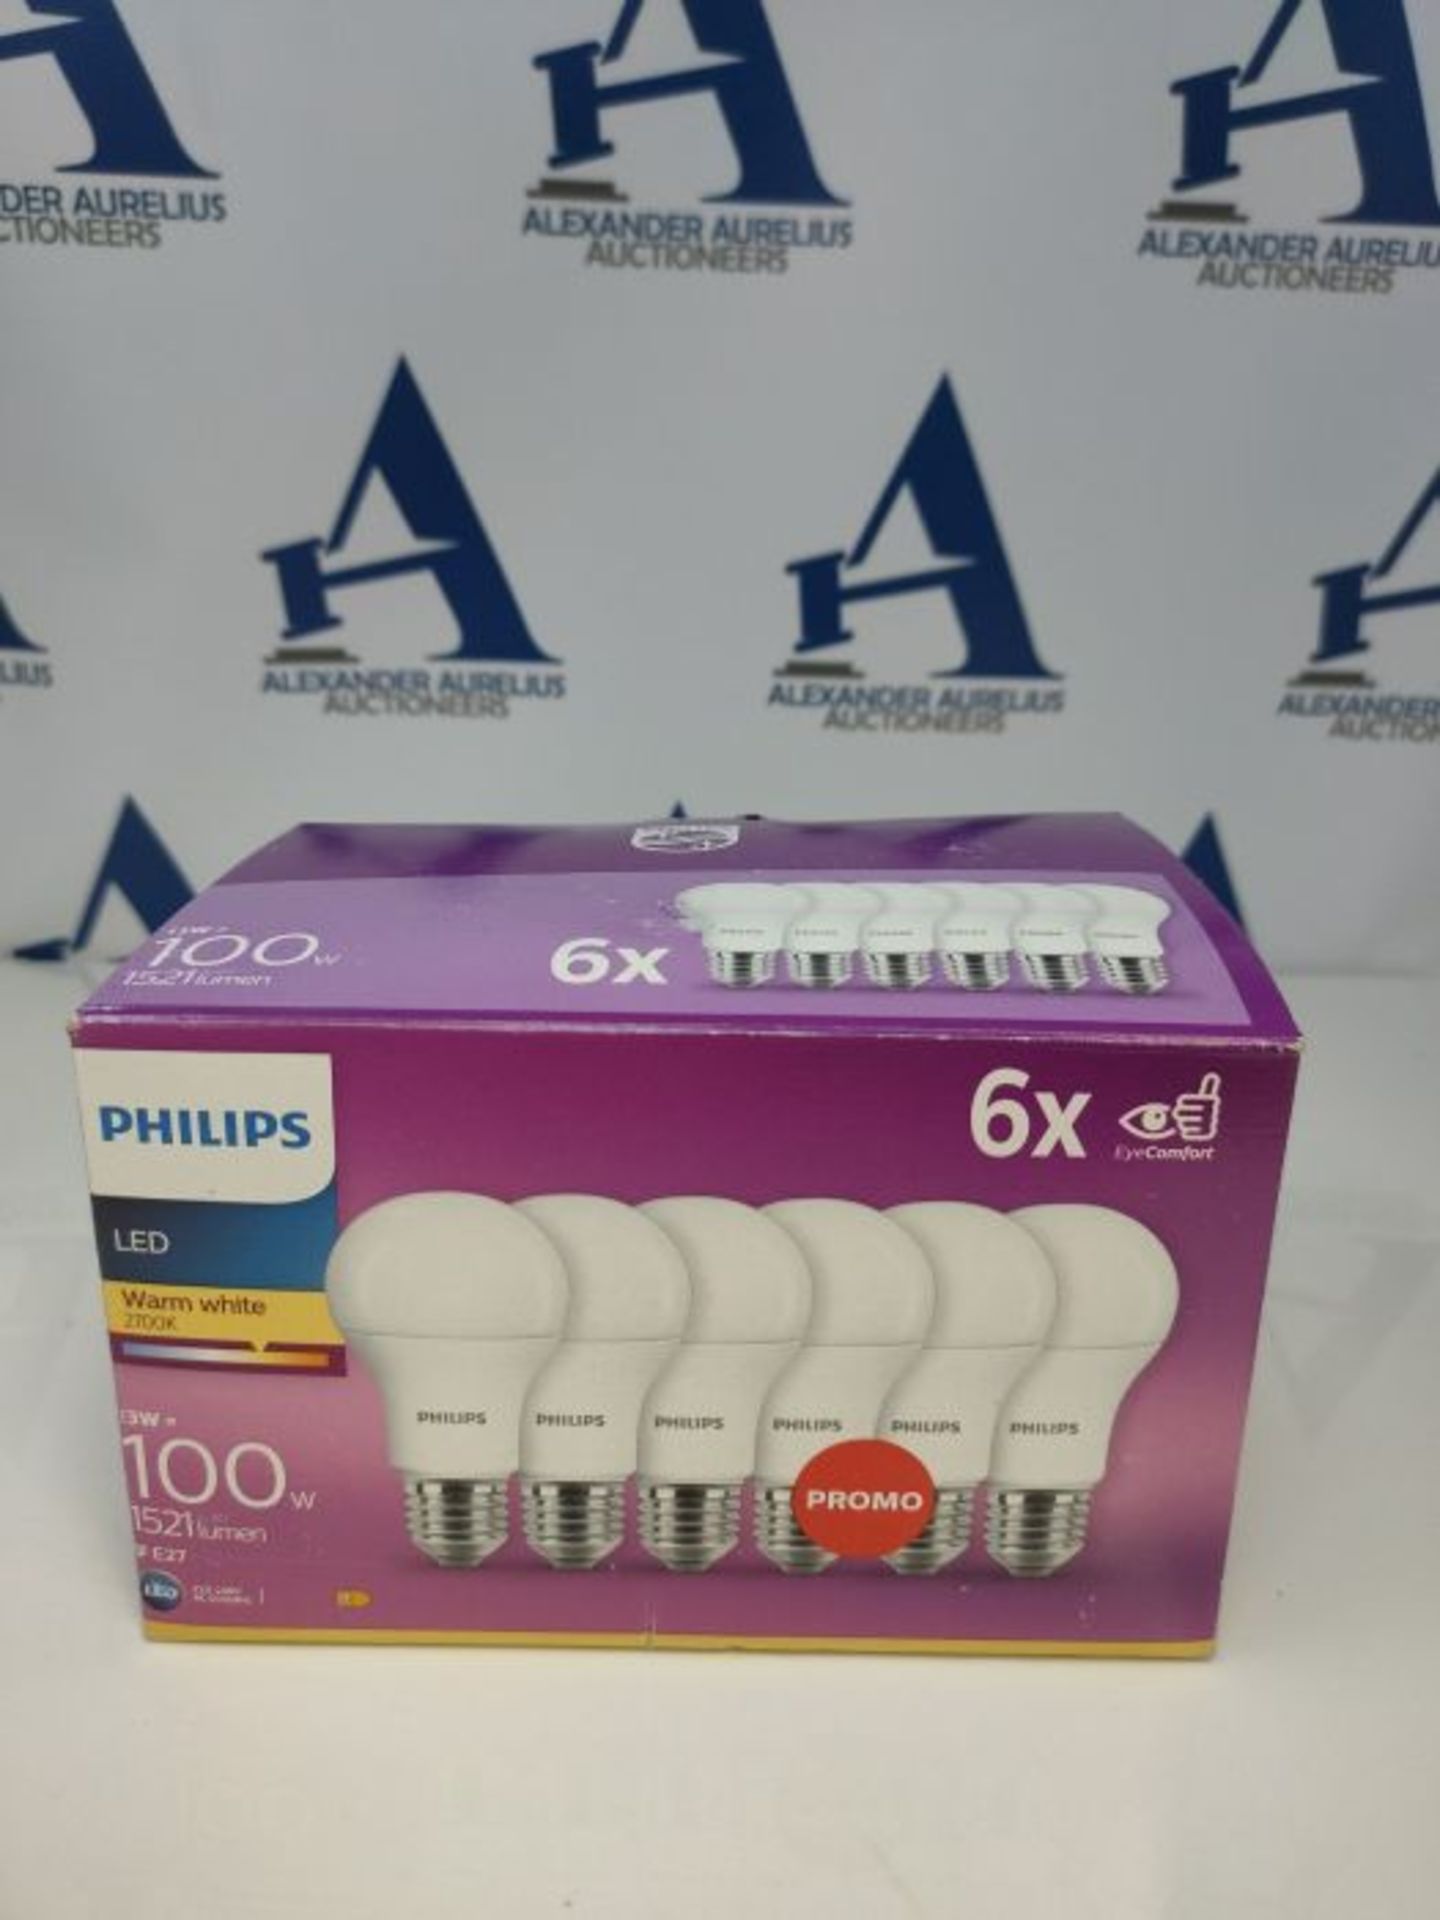 Philips LED A60 6 Pack Frosted Light Bulbs [E27 Edison Screw] 13W - 100 W Equivalent, - Image 2 of 3